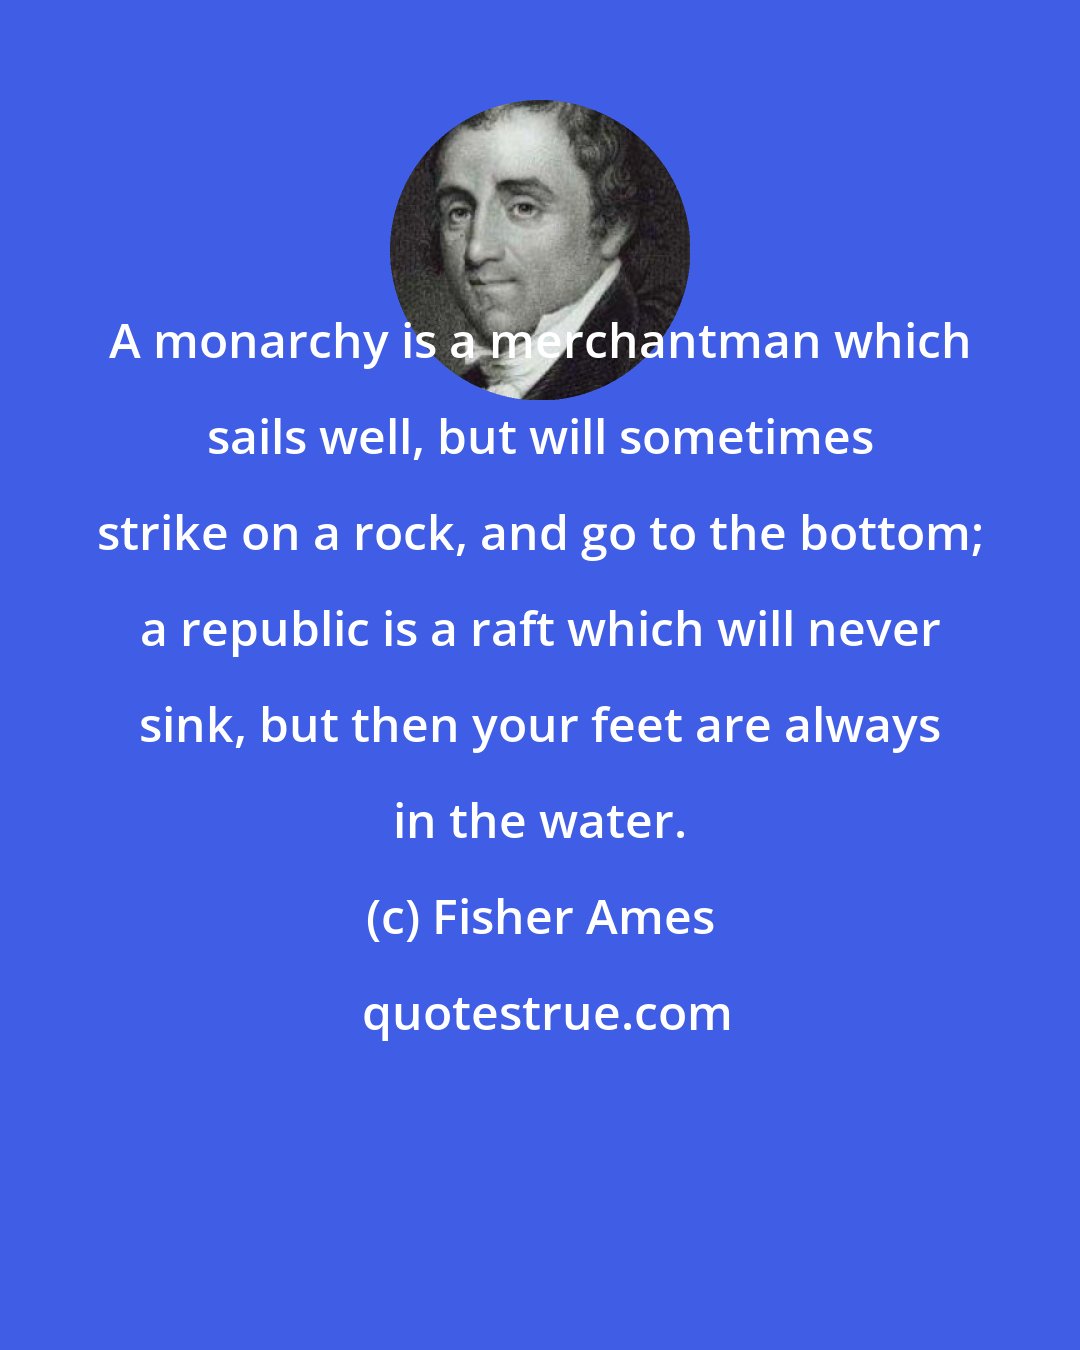 Fisher Ames: A monarchy is a merchantman which sails well, but will sometimes strike on a rock, and go to the bottom; a republic is a raft which will never sink, but then your feet are always in the water.